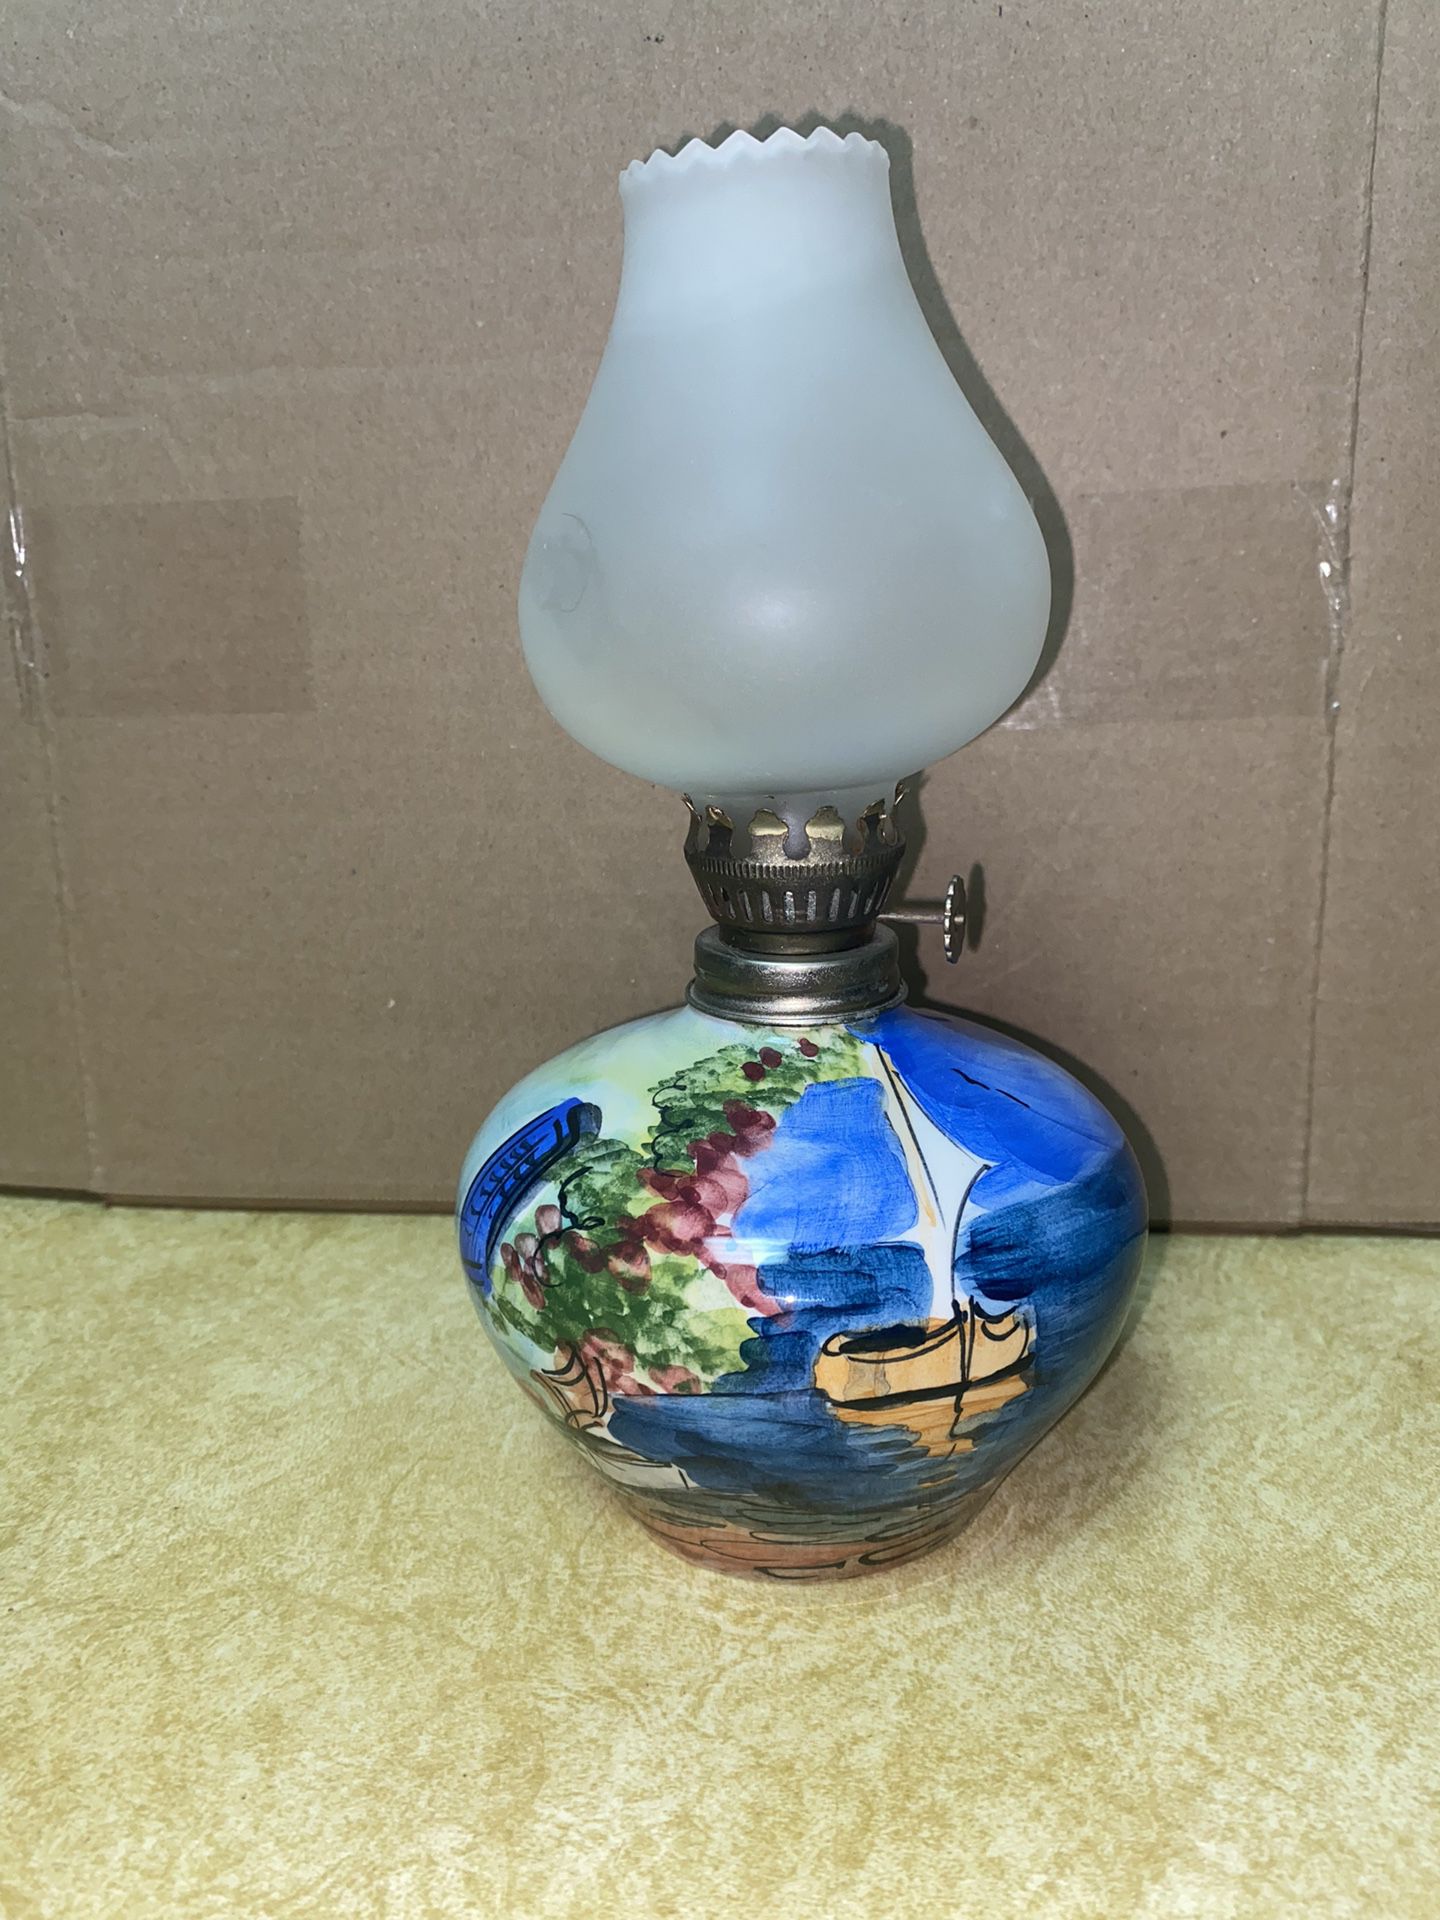 8.5 inches with Glass Handmade Hand painted Imported From Greece Ceramic Oil Lamp